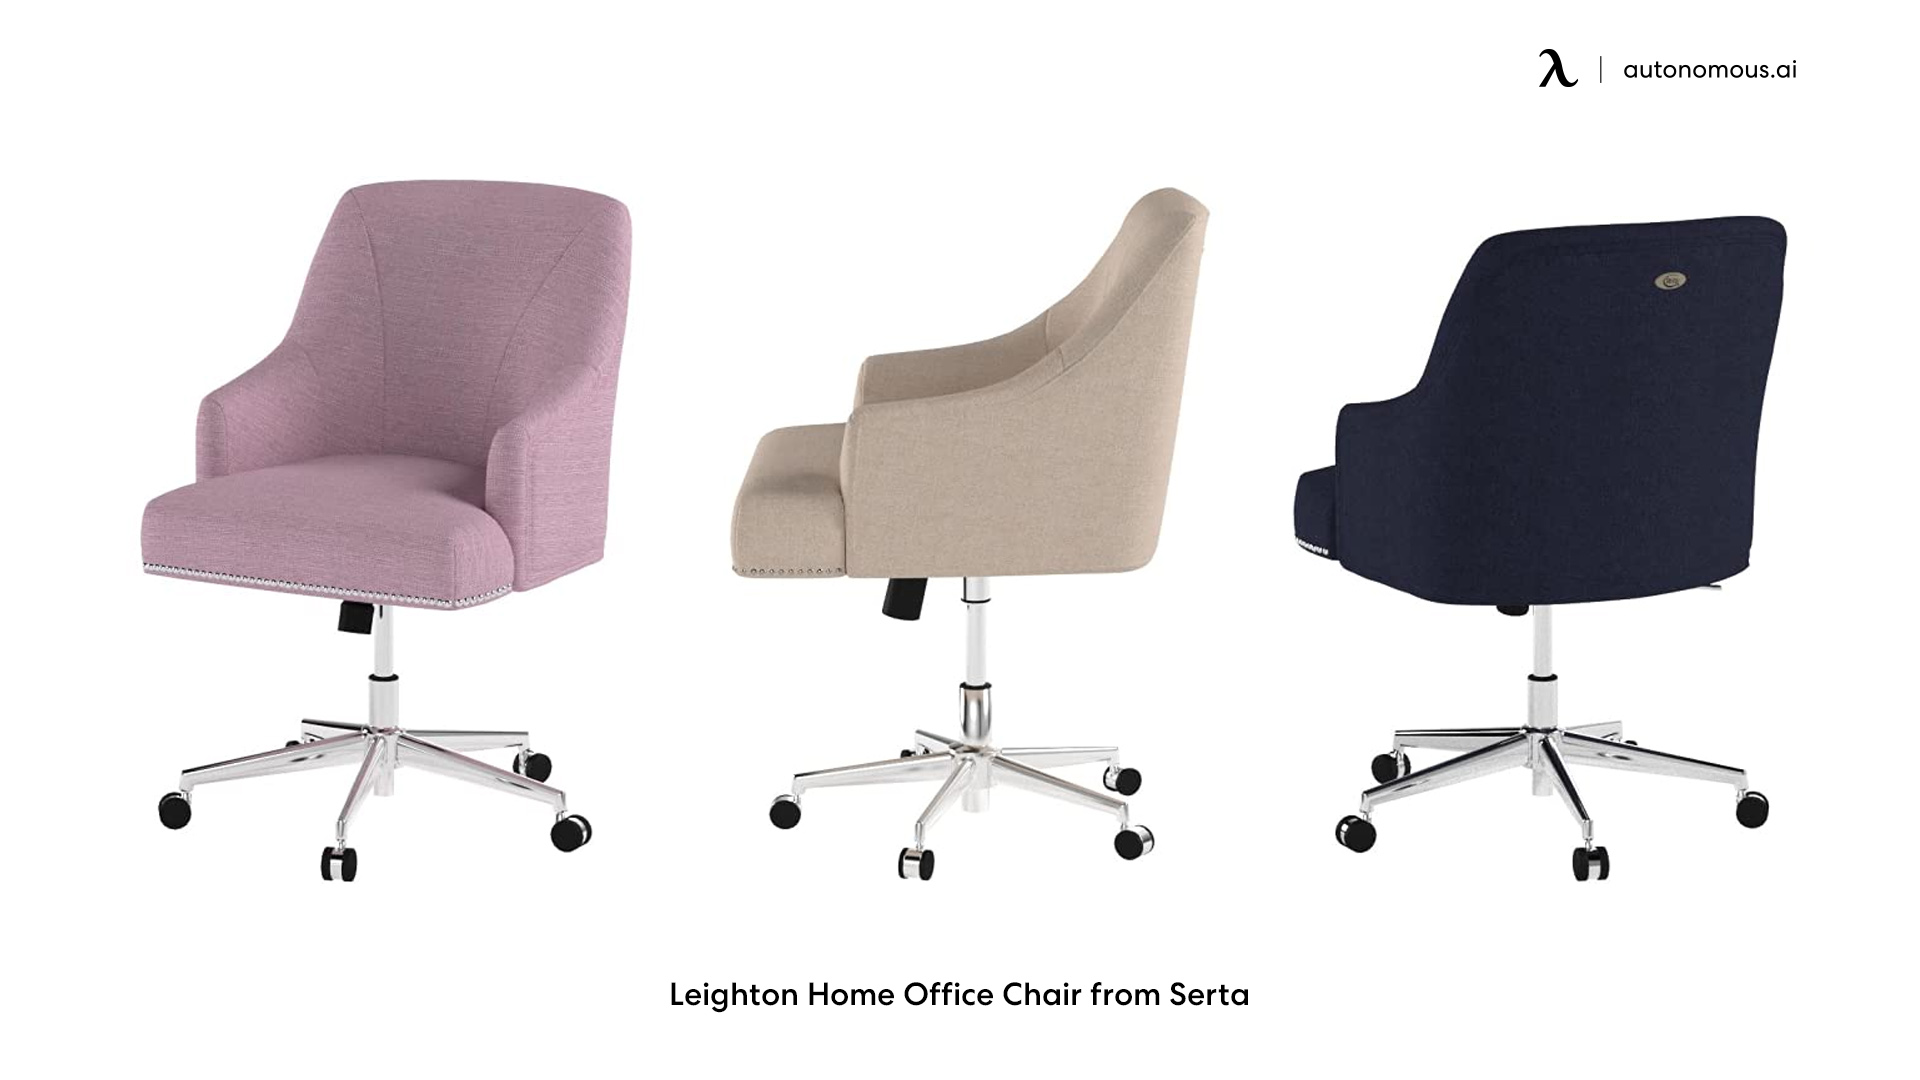 Leighton Home Office Chair from Serta